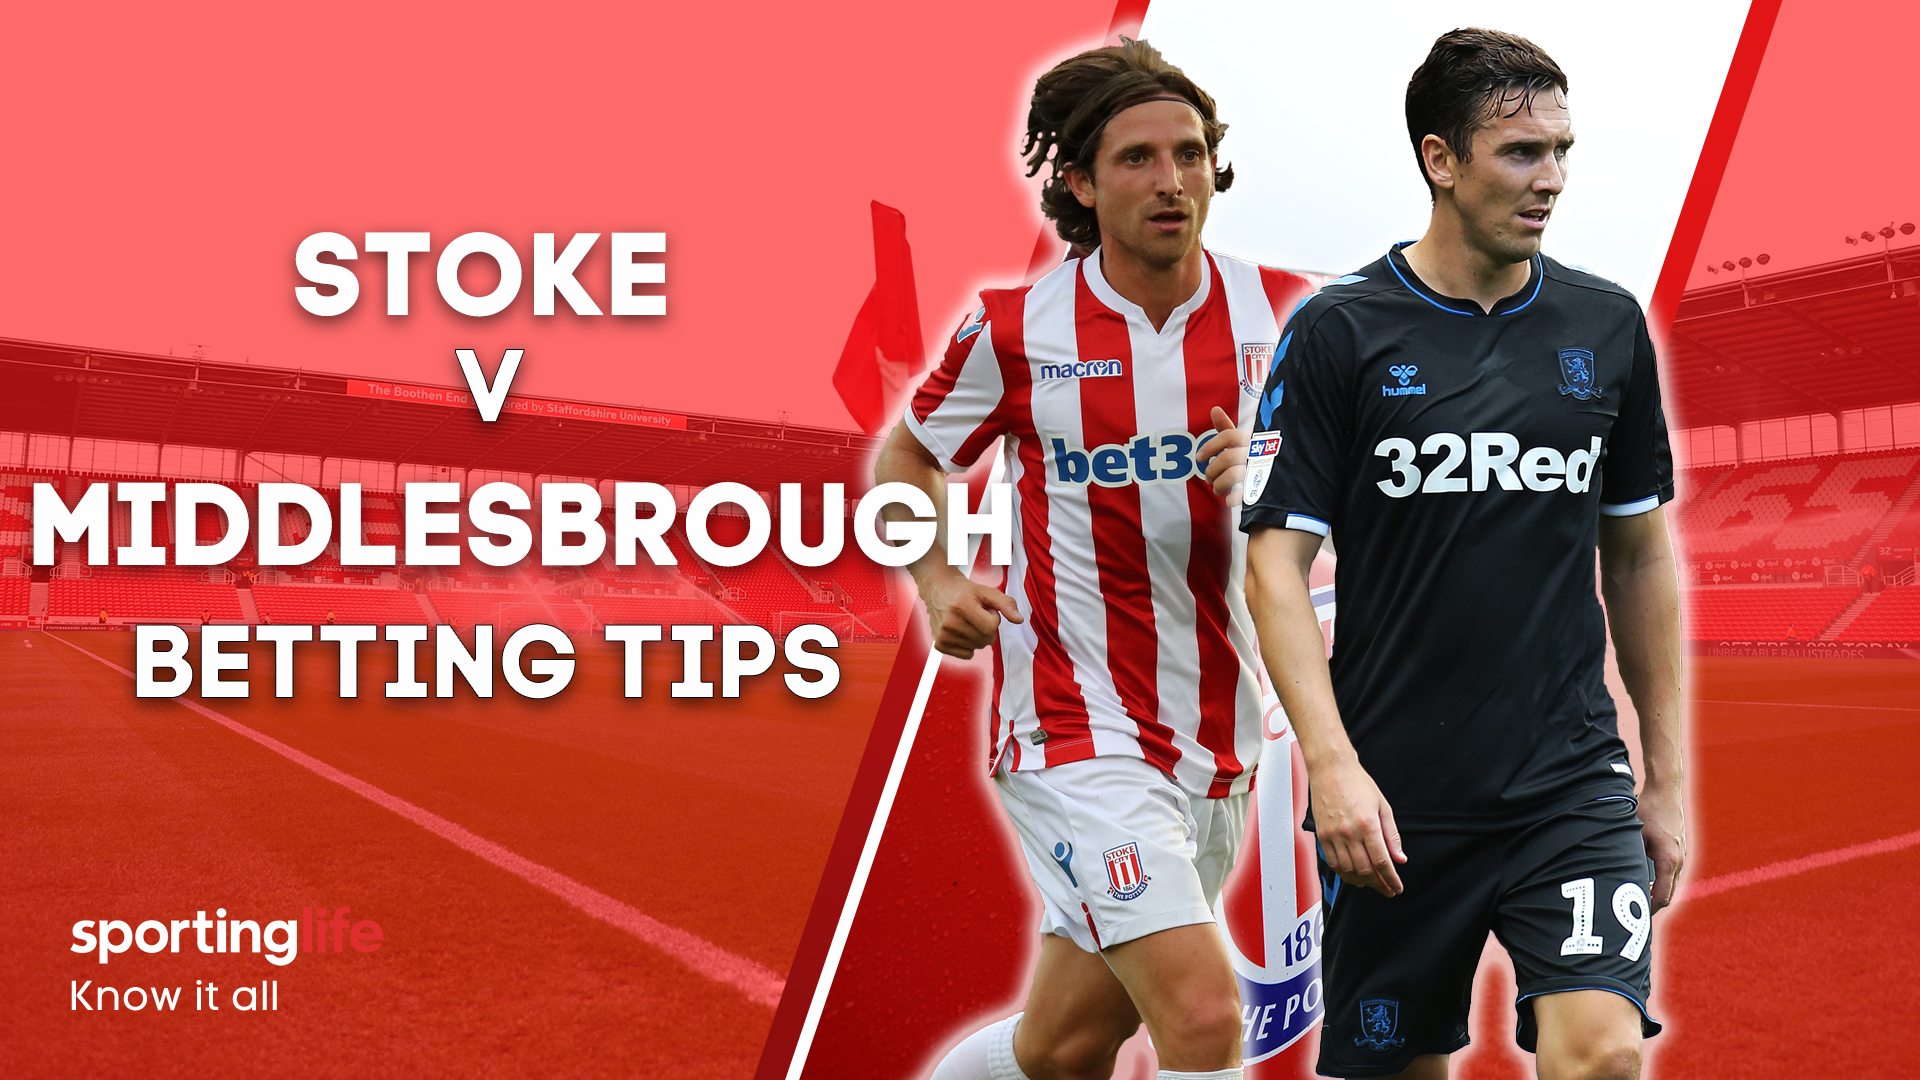 Points target for Stoke City, Nottingham Forest and Middlesbrough